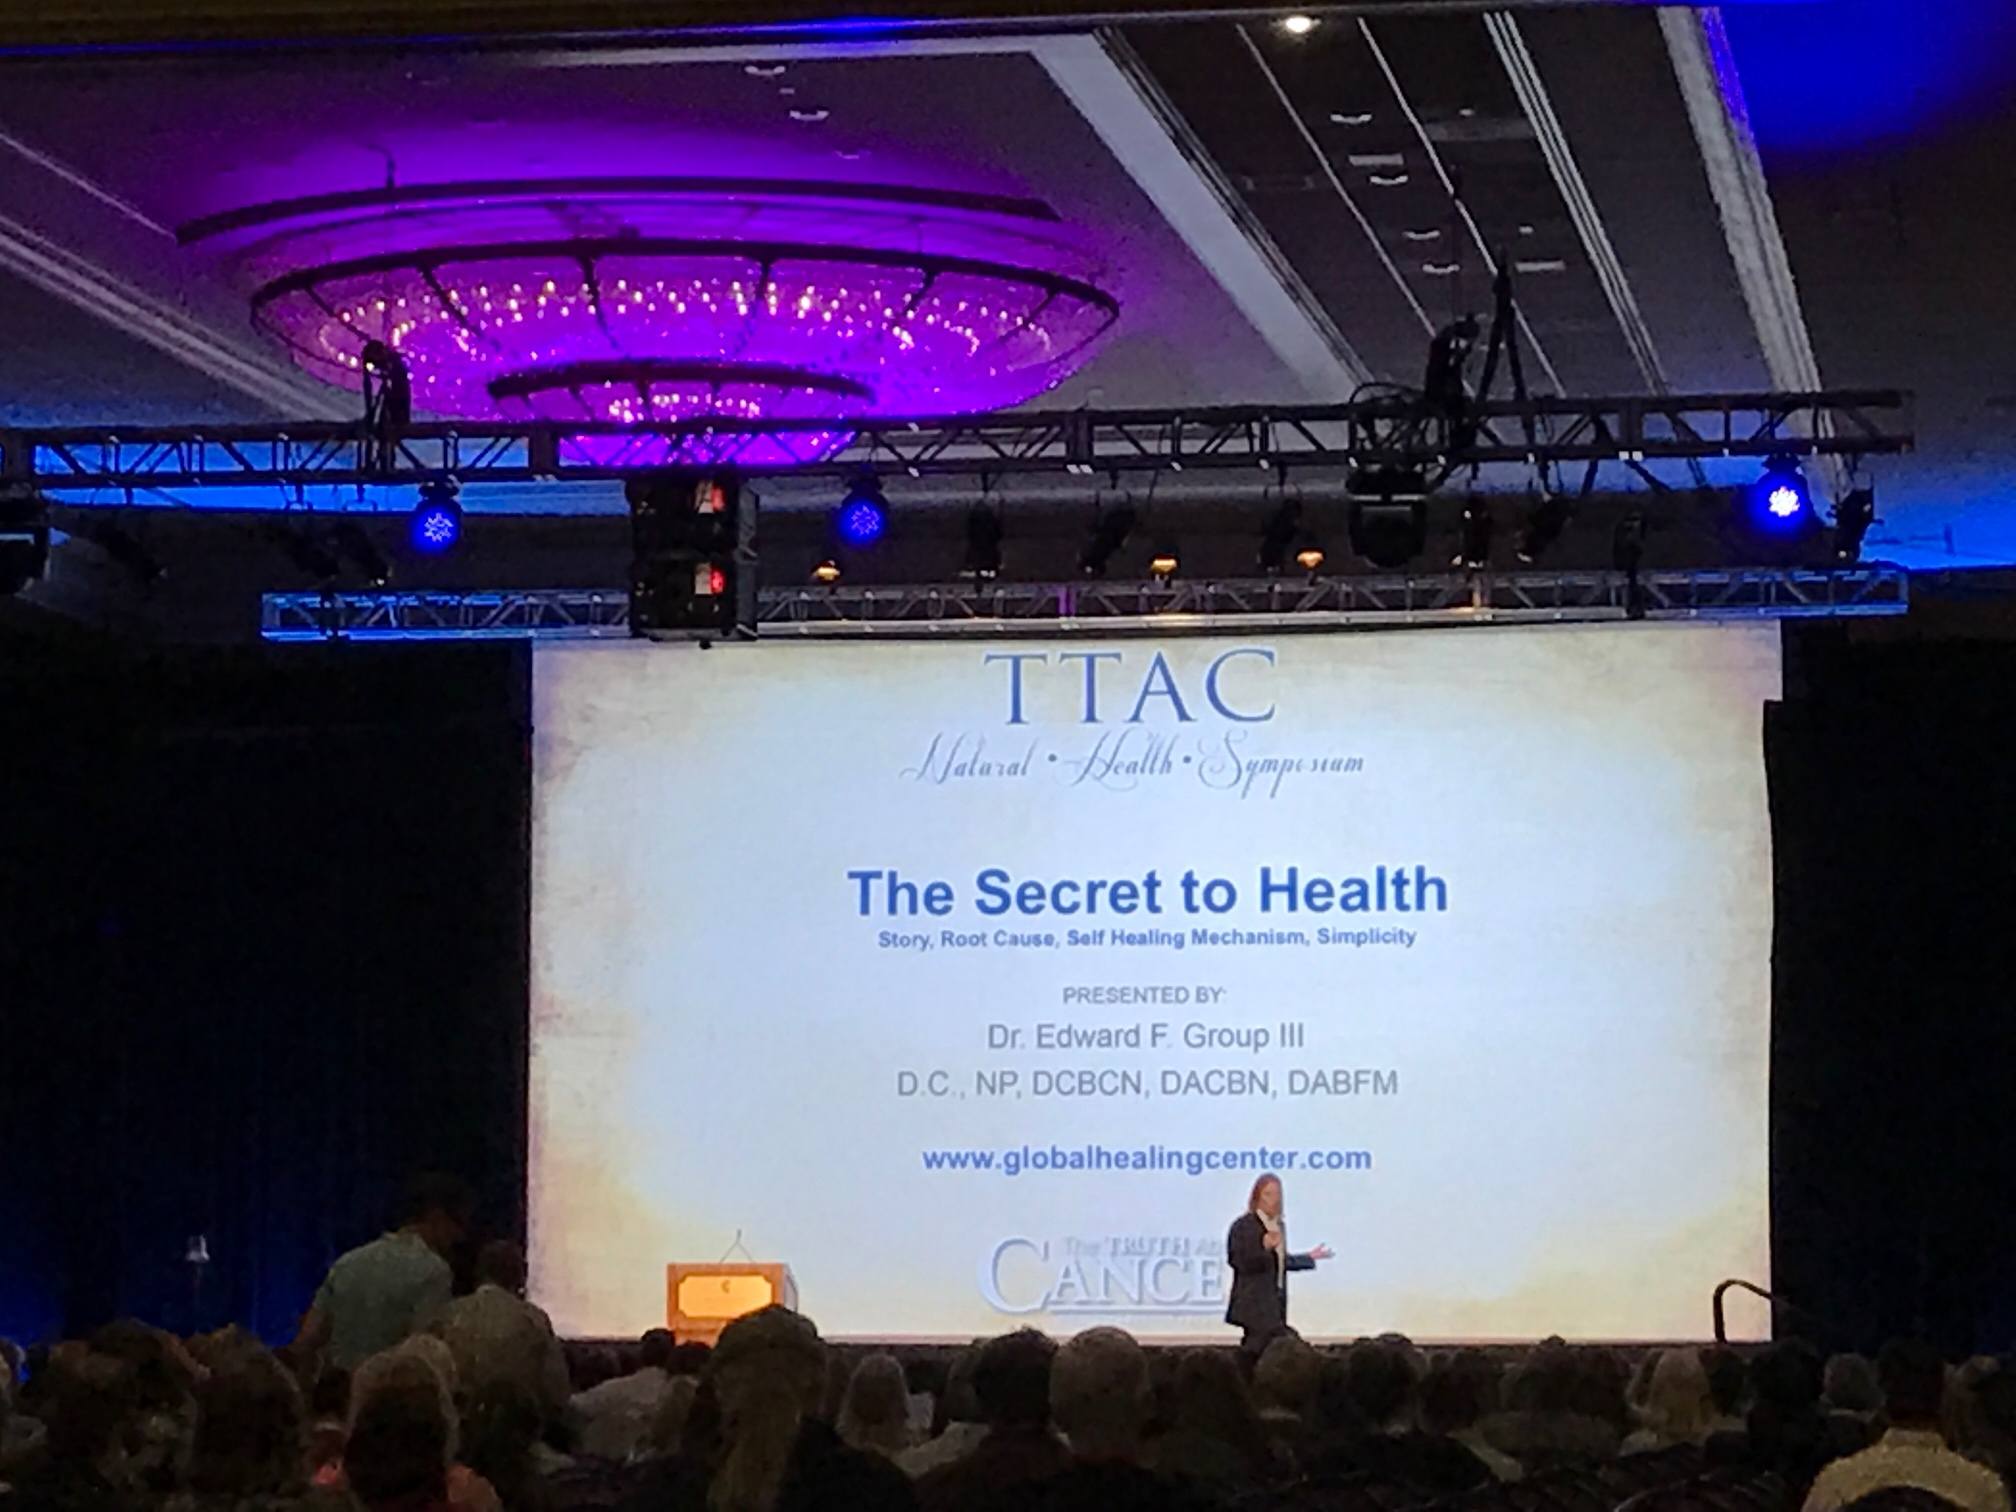 Dr. Group, DC is talking about his Secret to Health presentation at the The Truth About Cancer Symposium.